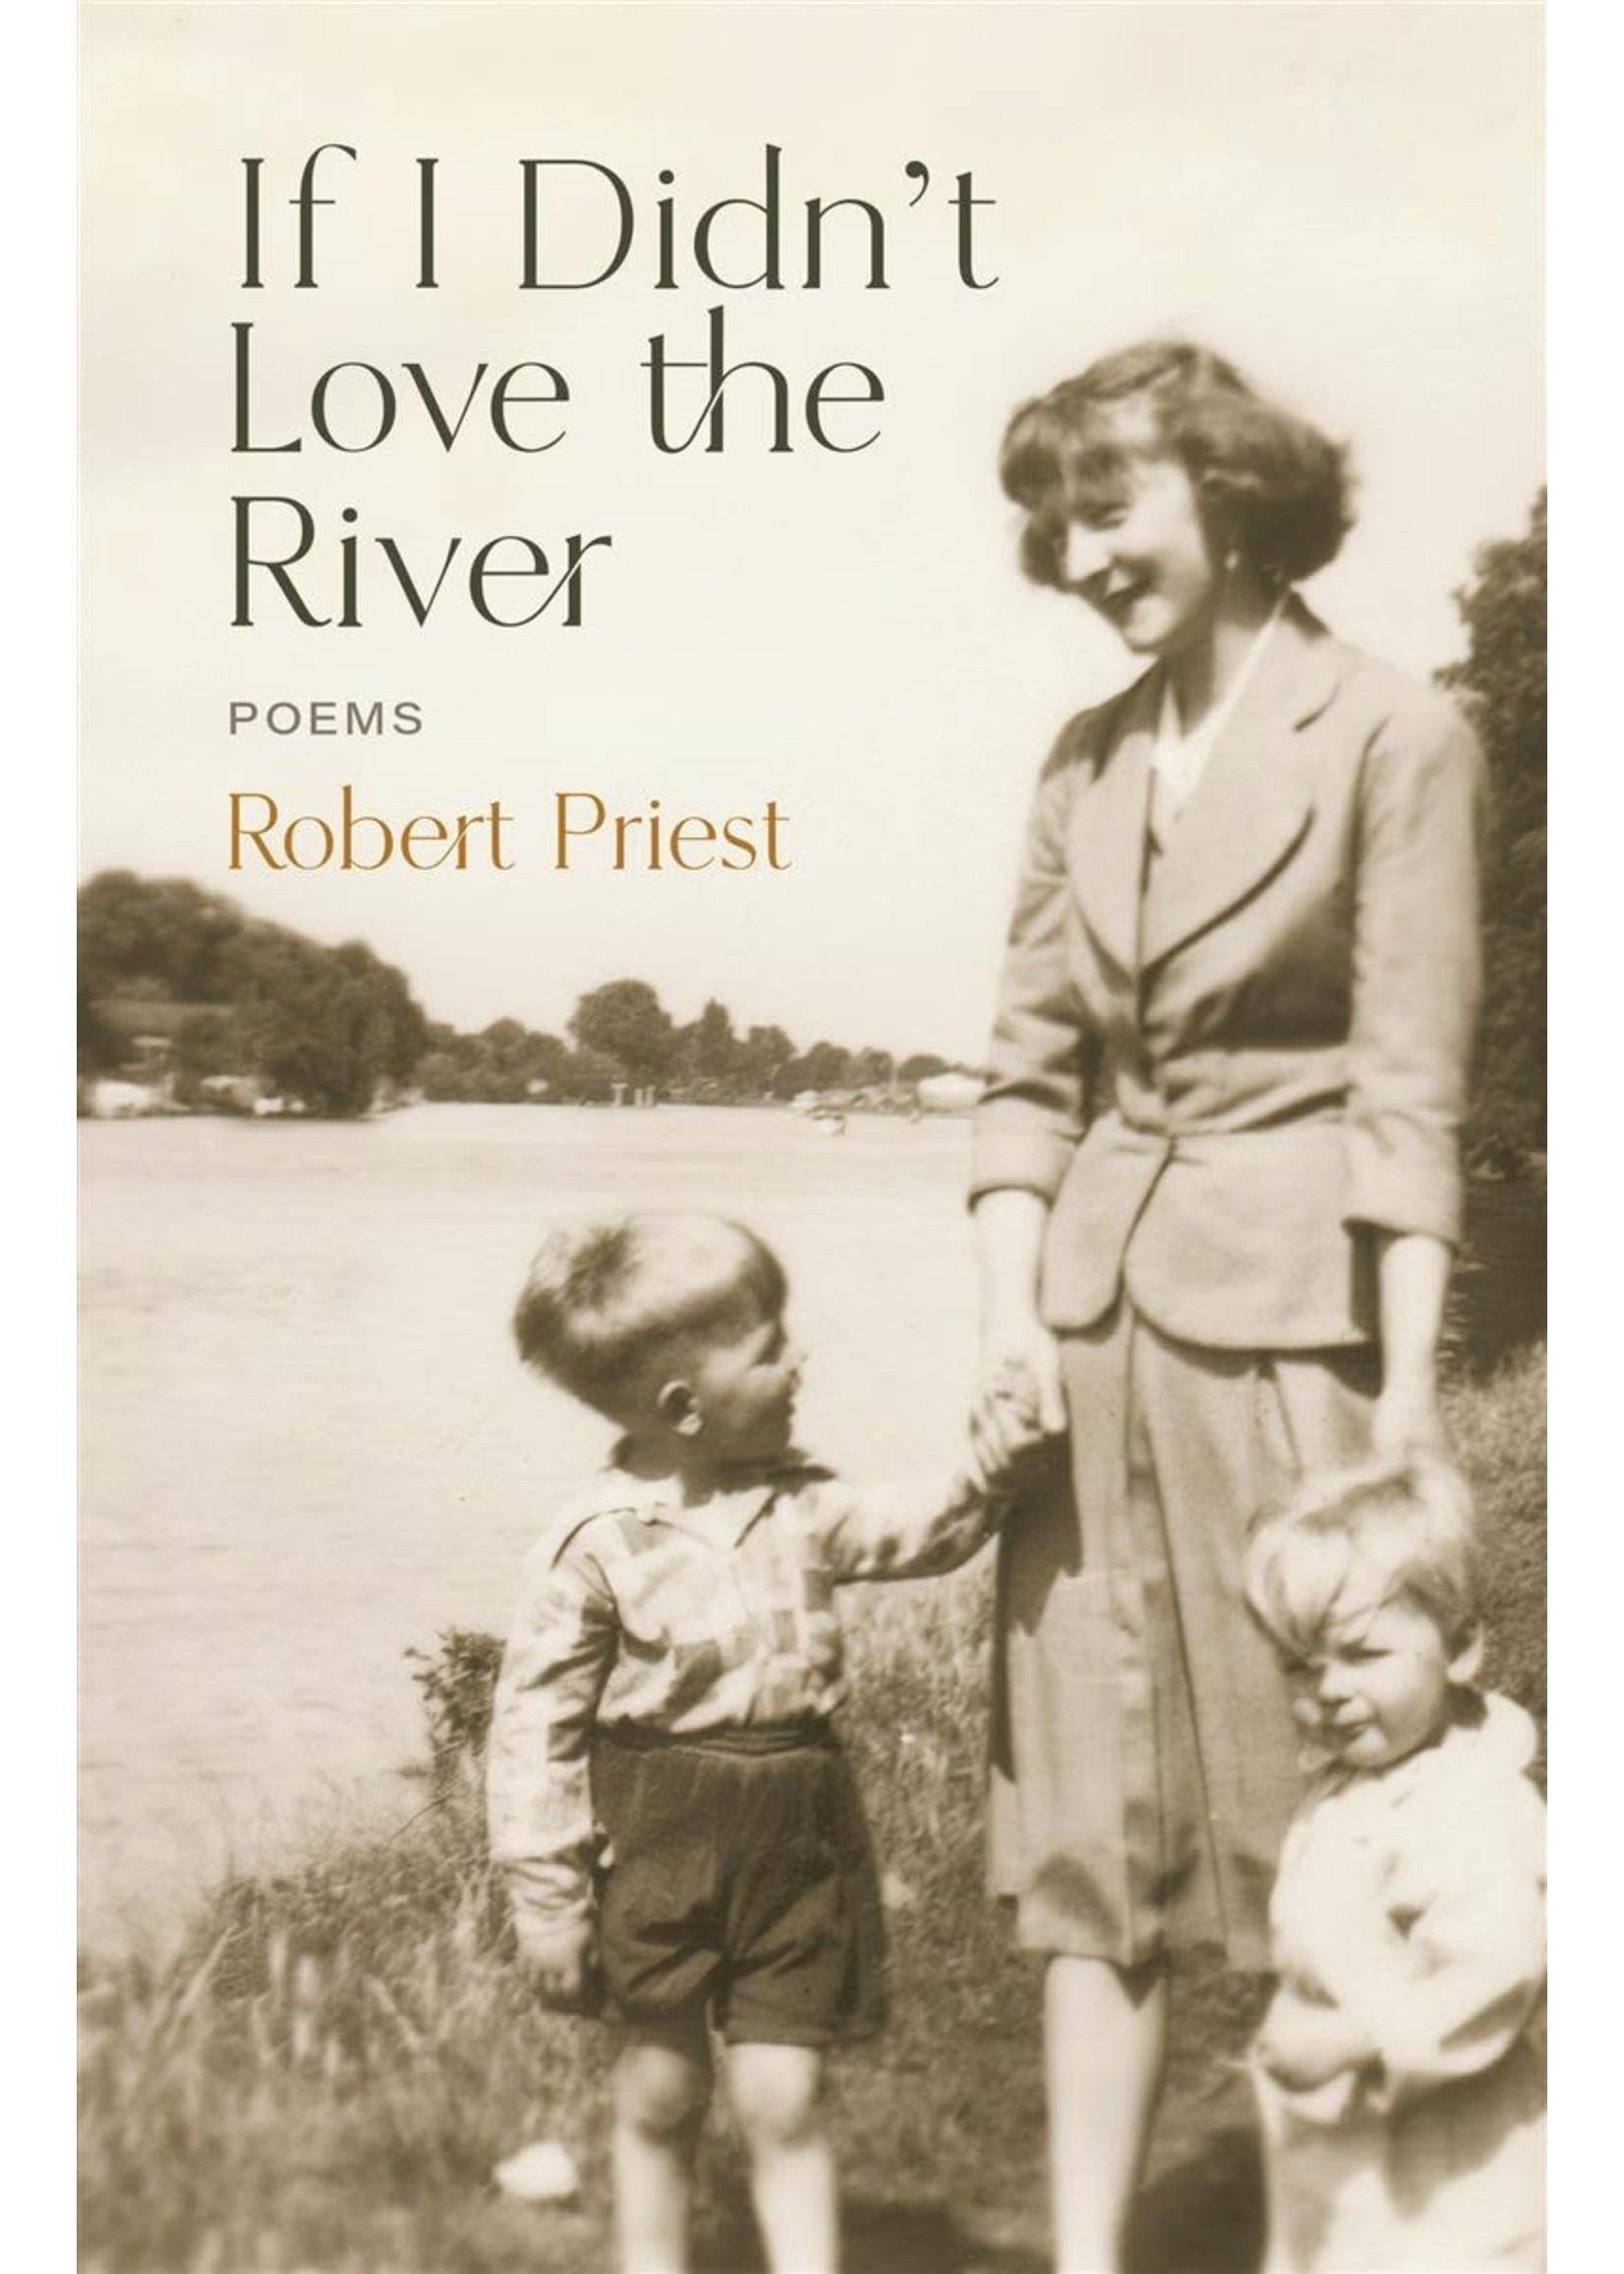 If I Didn’t Love the River: Poems by Robert Priest